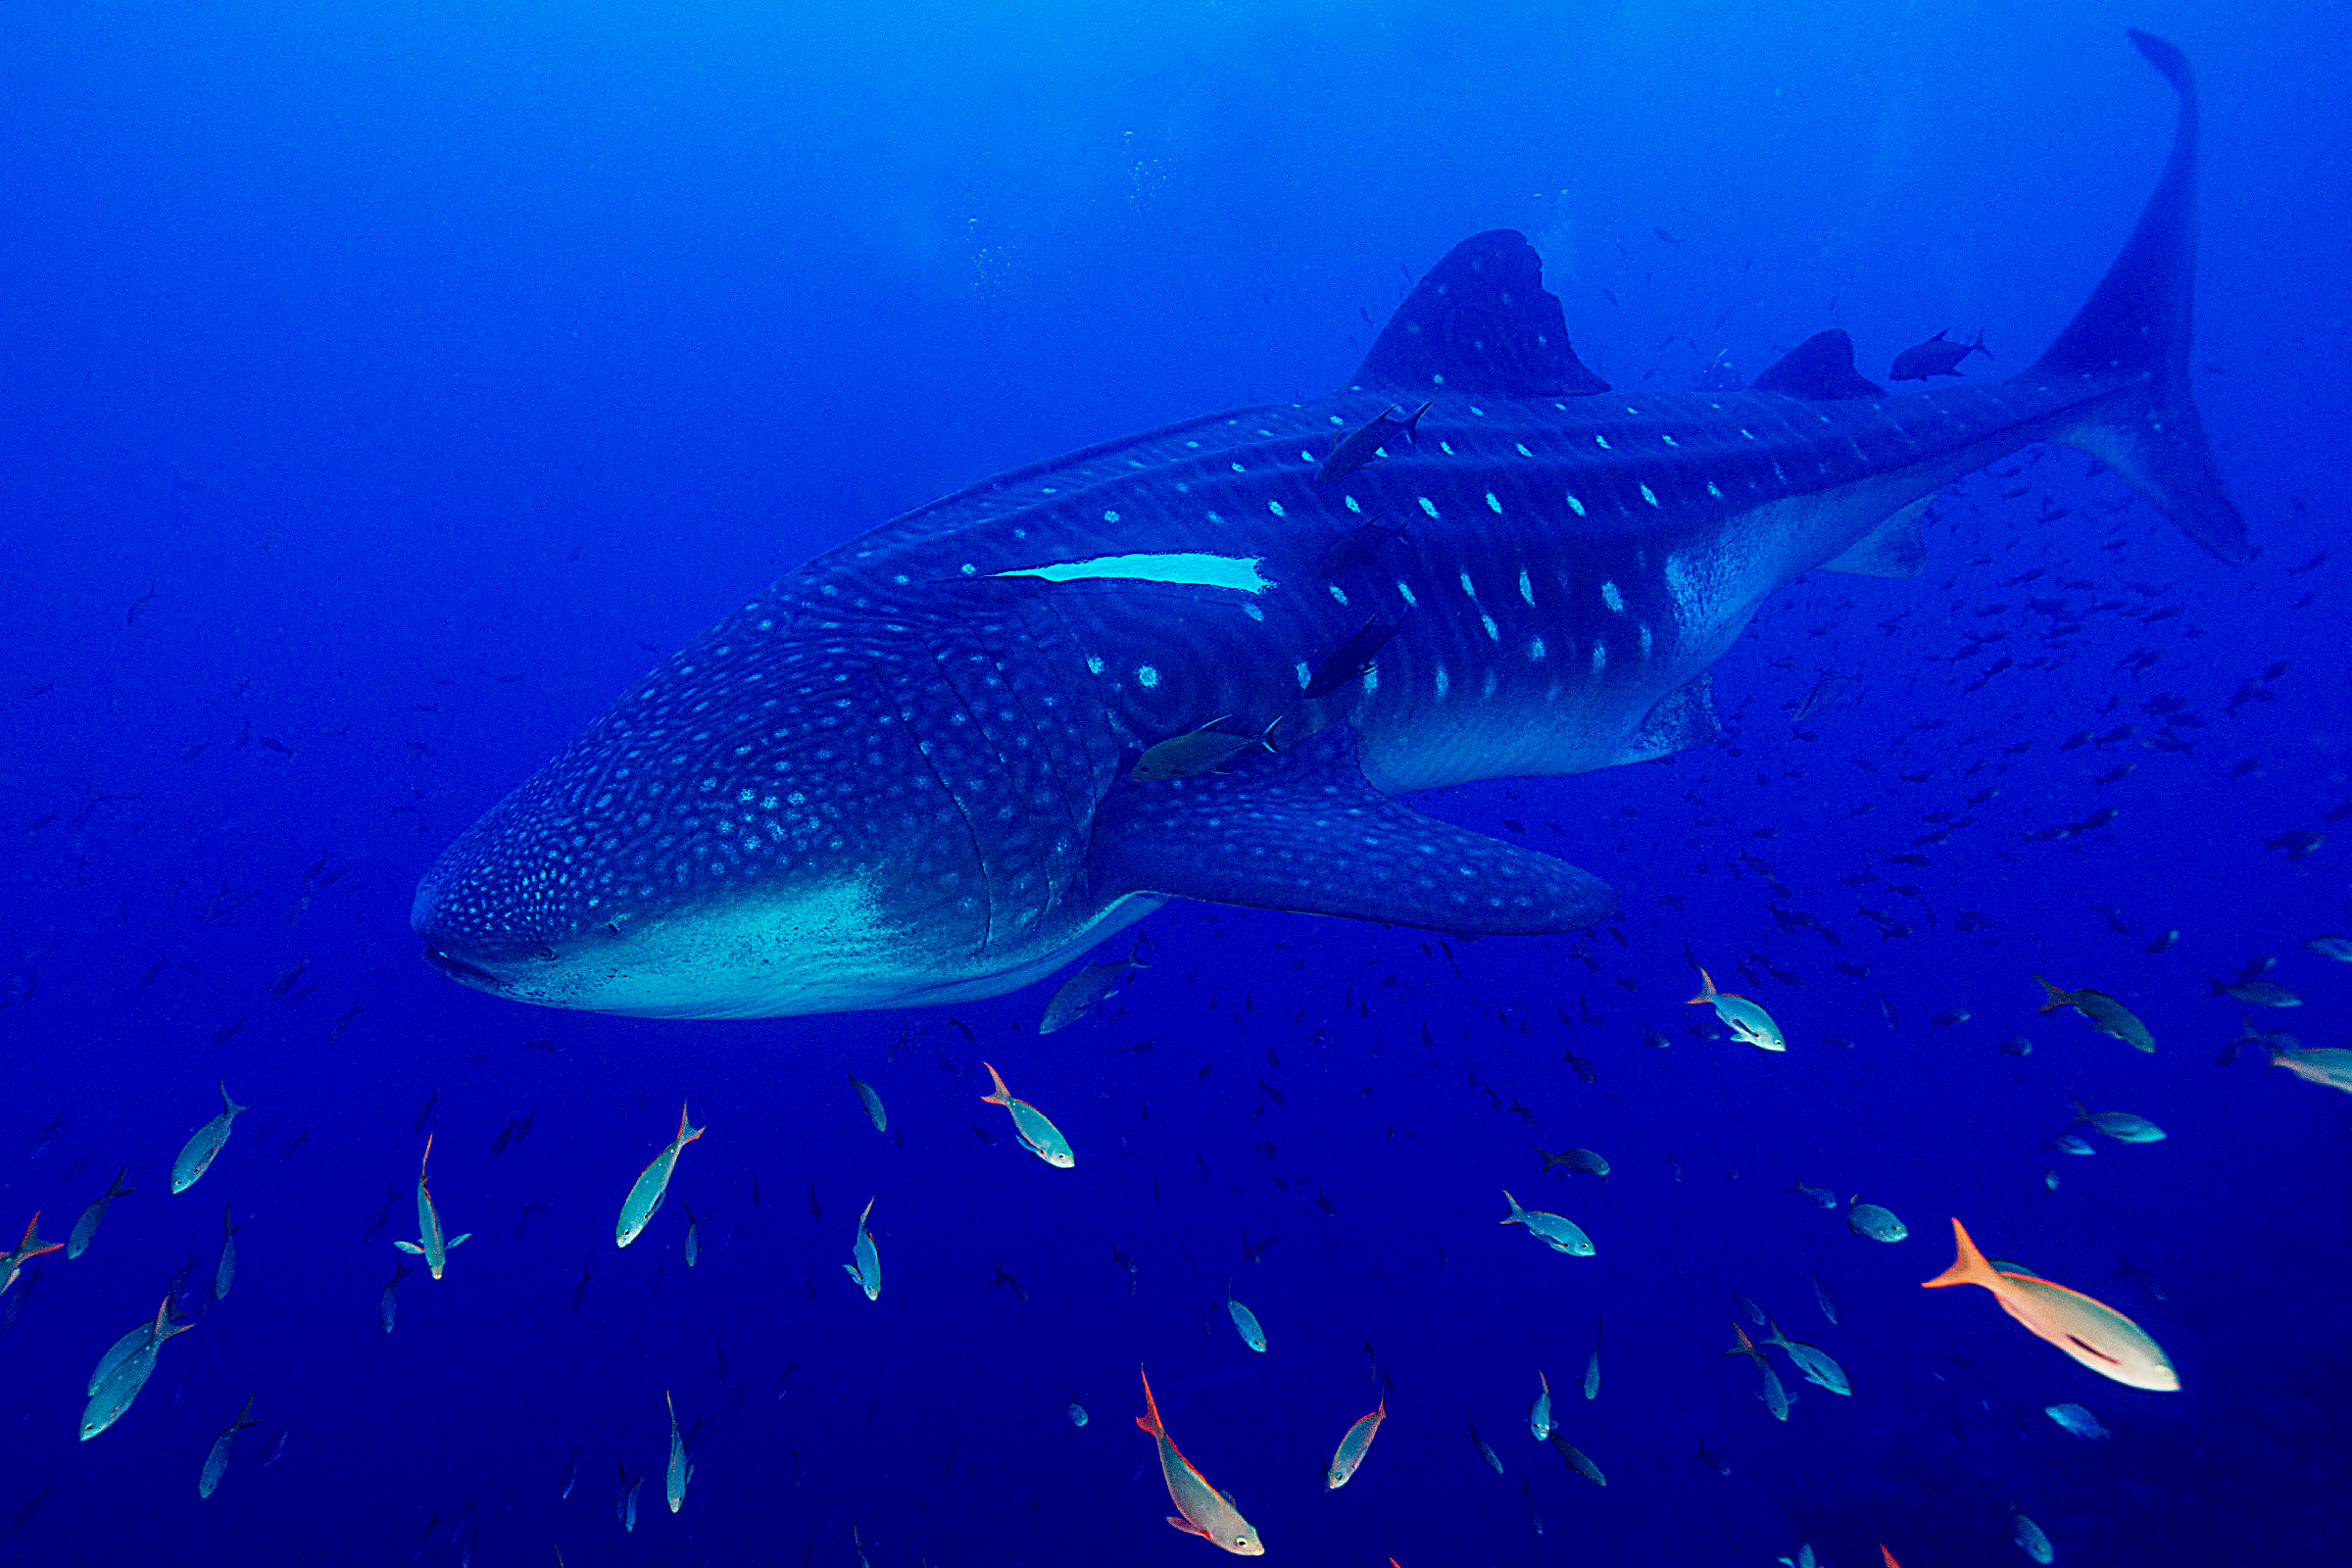 The Presence of Whale sharks is a Good Indicator of a Healthy